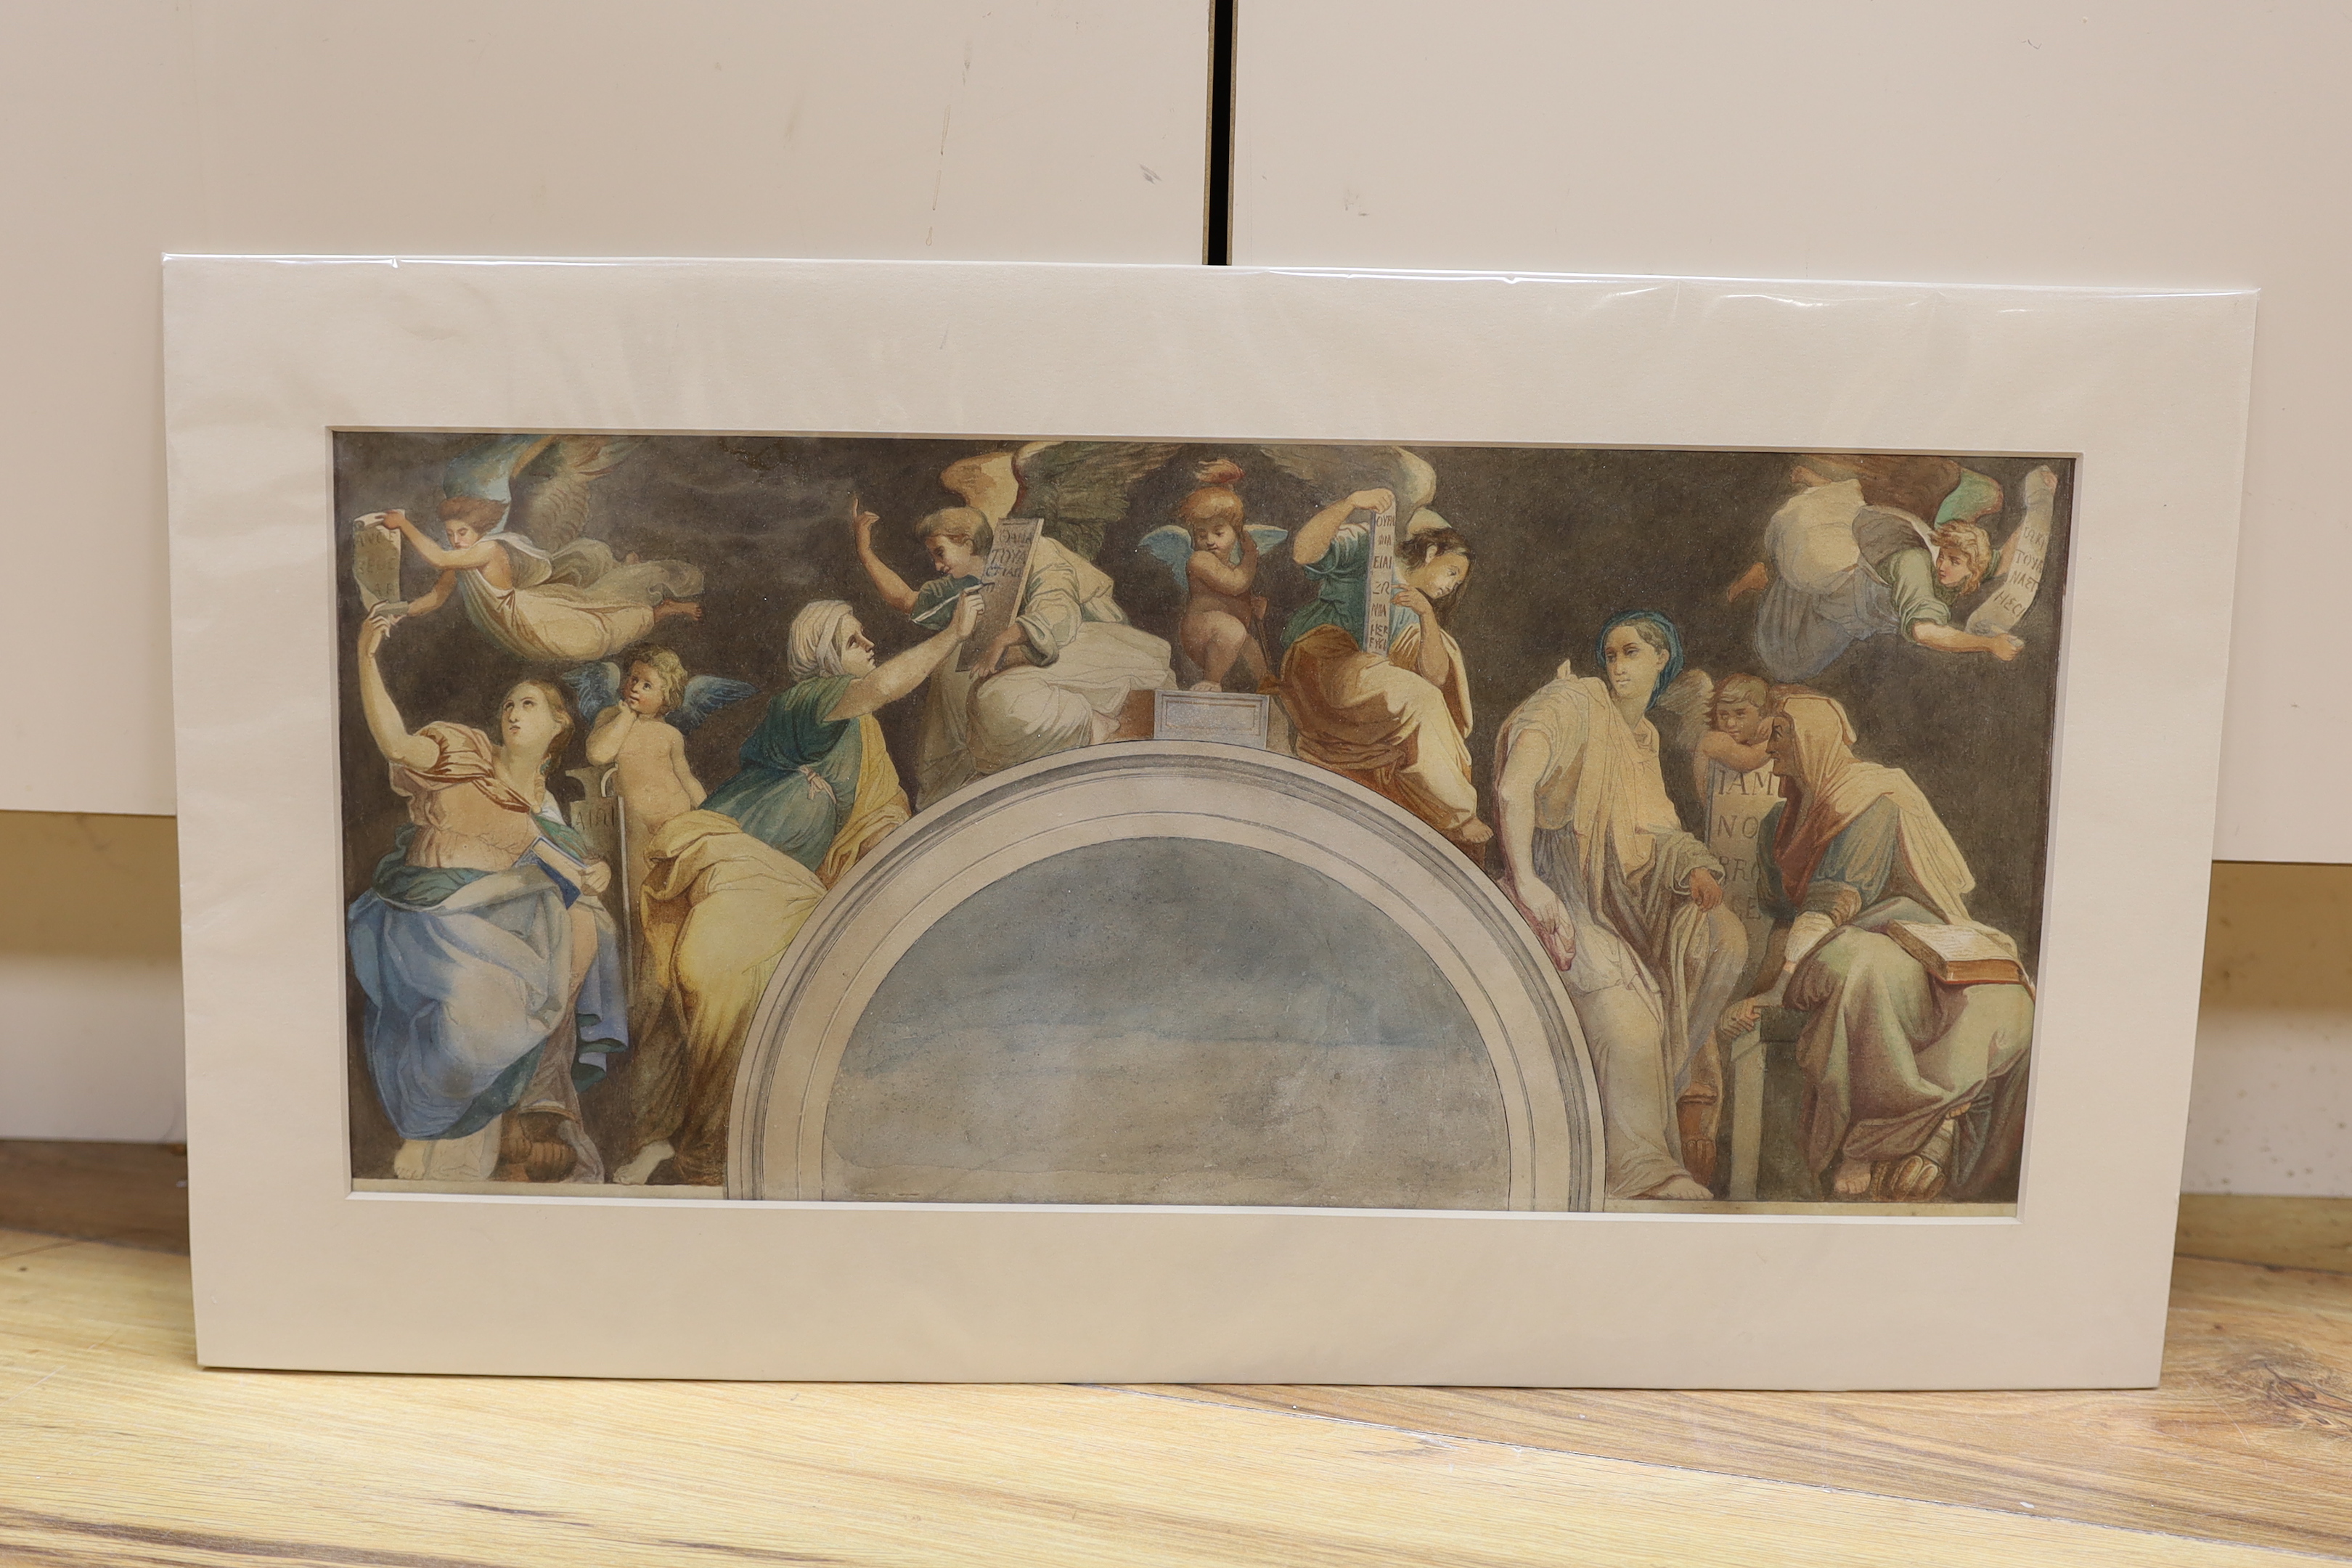 19th century English School, watercolour, Design for an architectural mural, 20.5 x 46cm, unframed